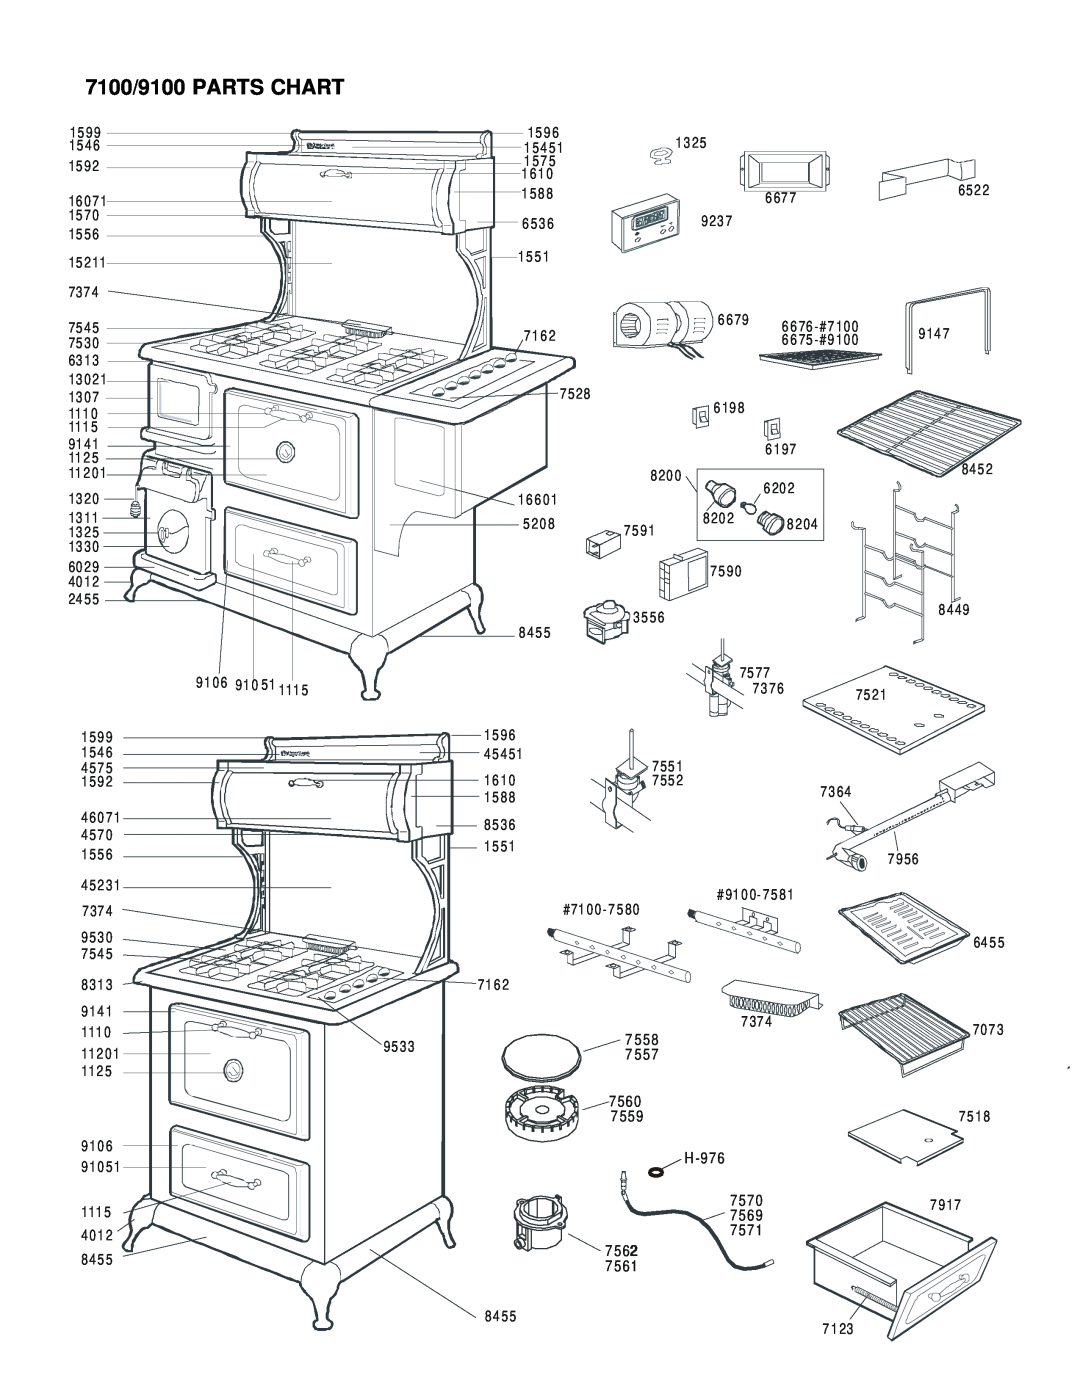 Hearth and Home Technologies manual 7100/9100 PARTS CHART, 7 7 7560 